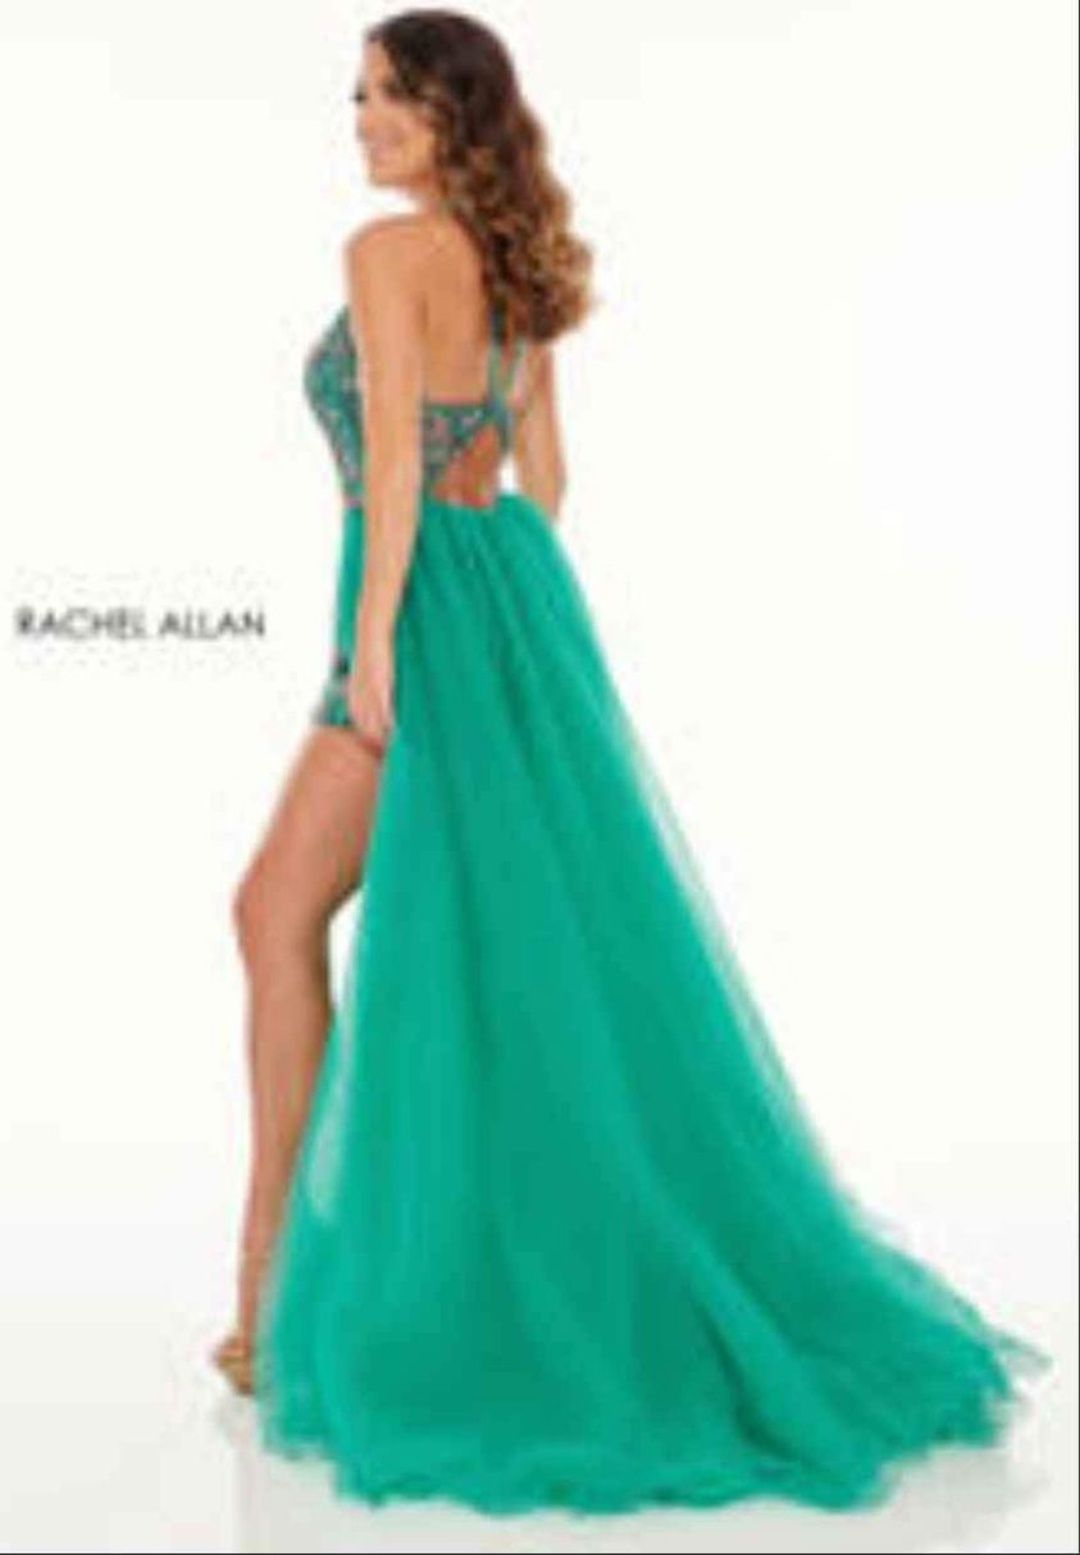 Rachel Allan Size 2 Pageant Emerald Blue Ball Gown on Queenly